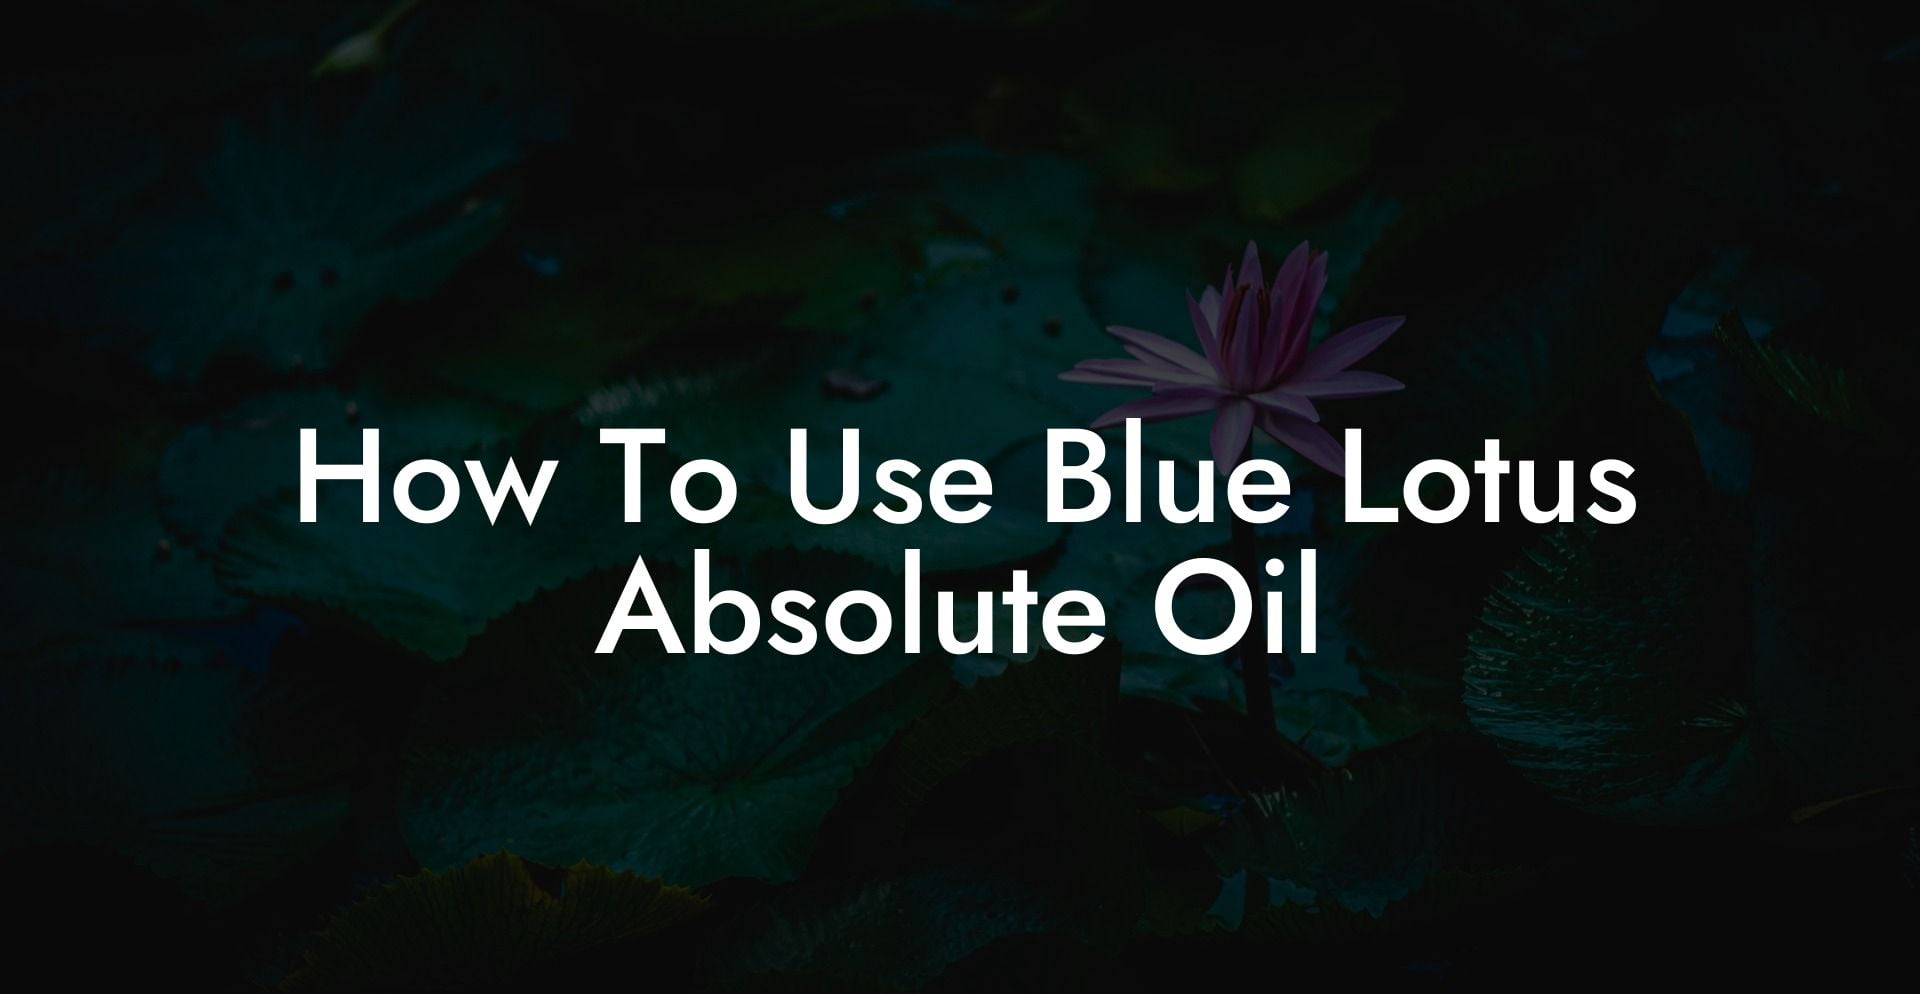 How To Use Blue Lotus Absolute Oil